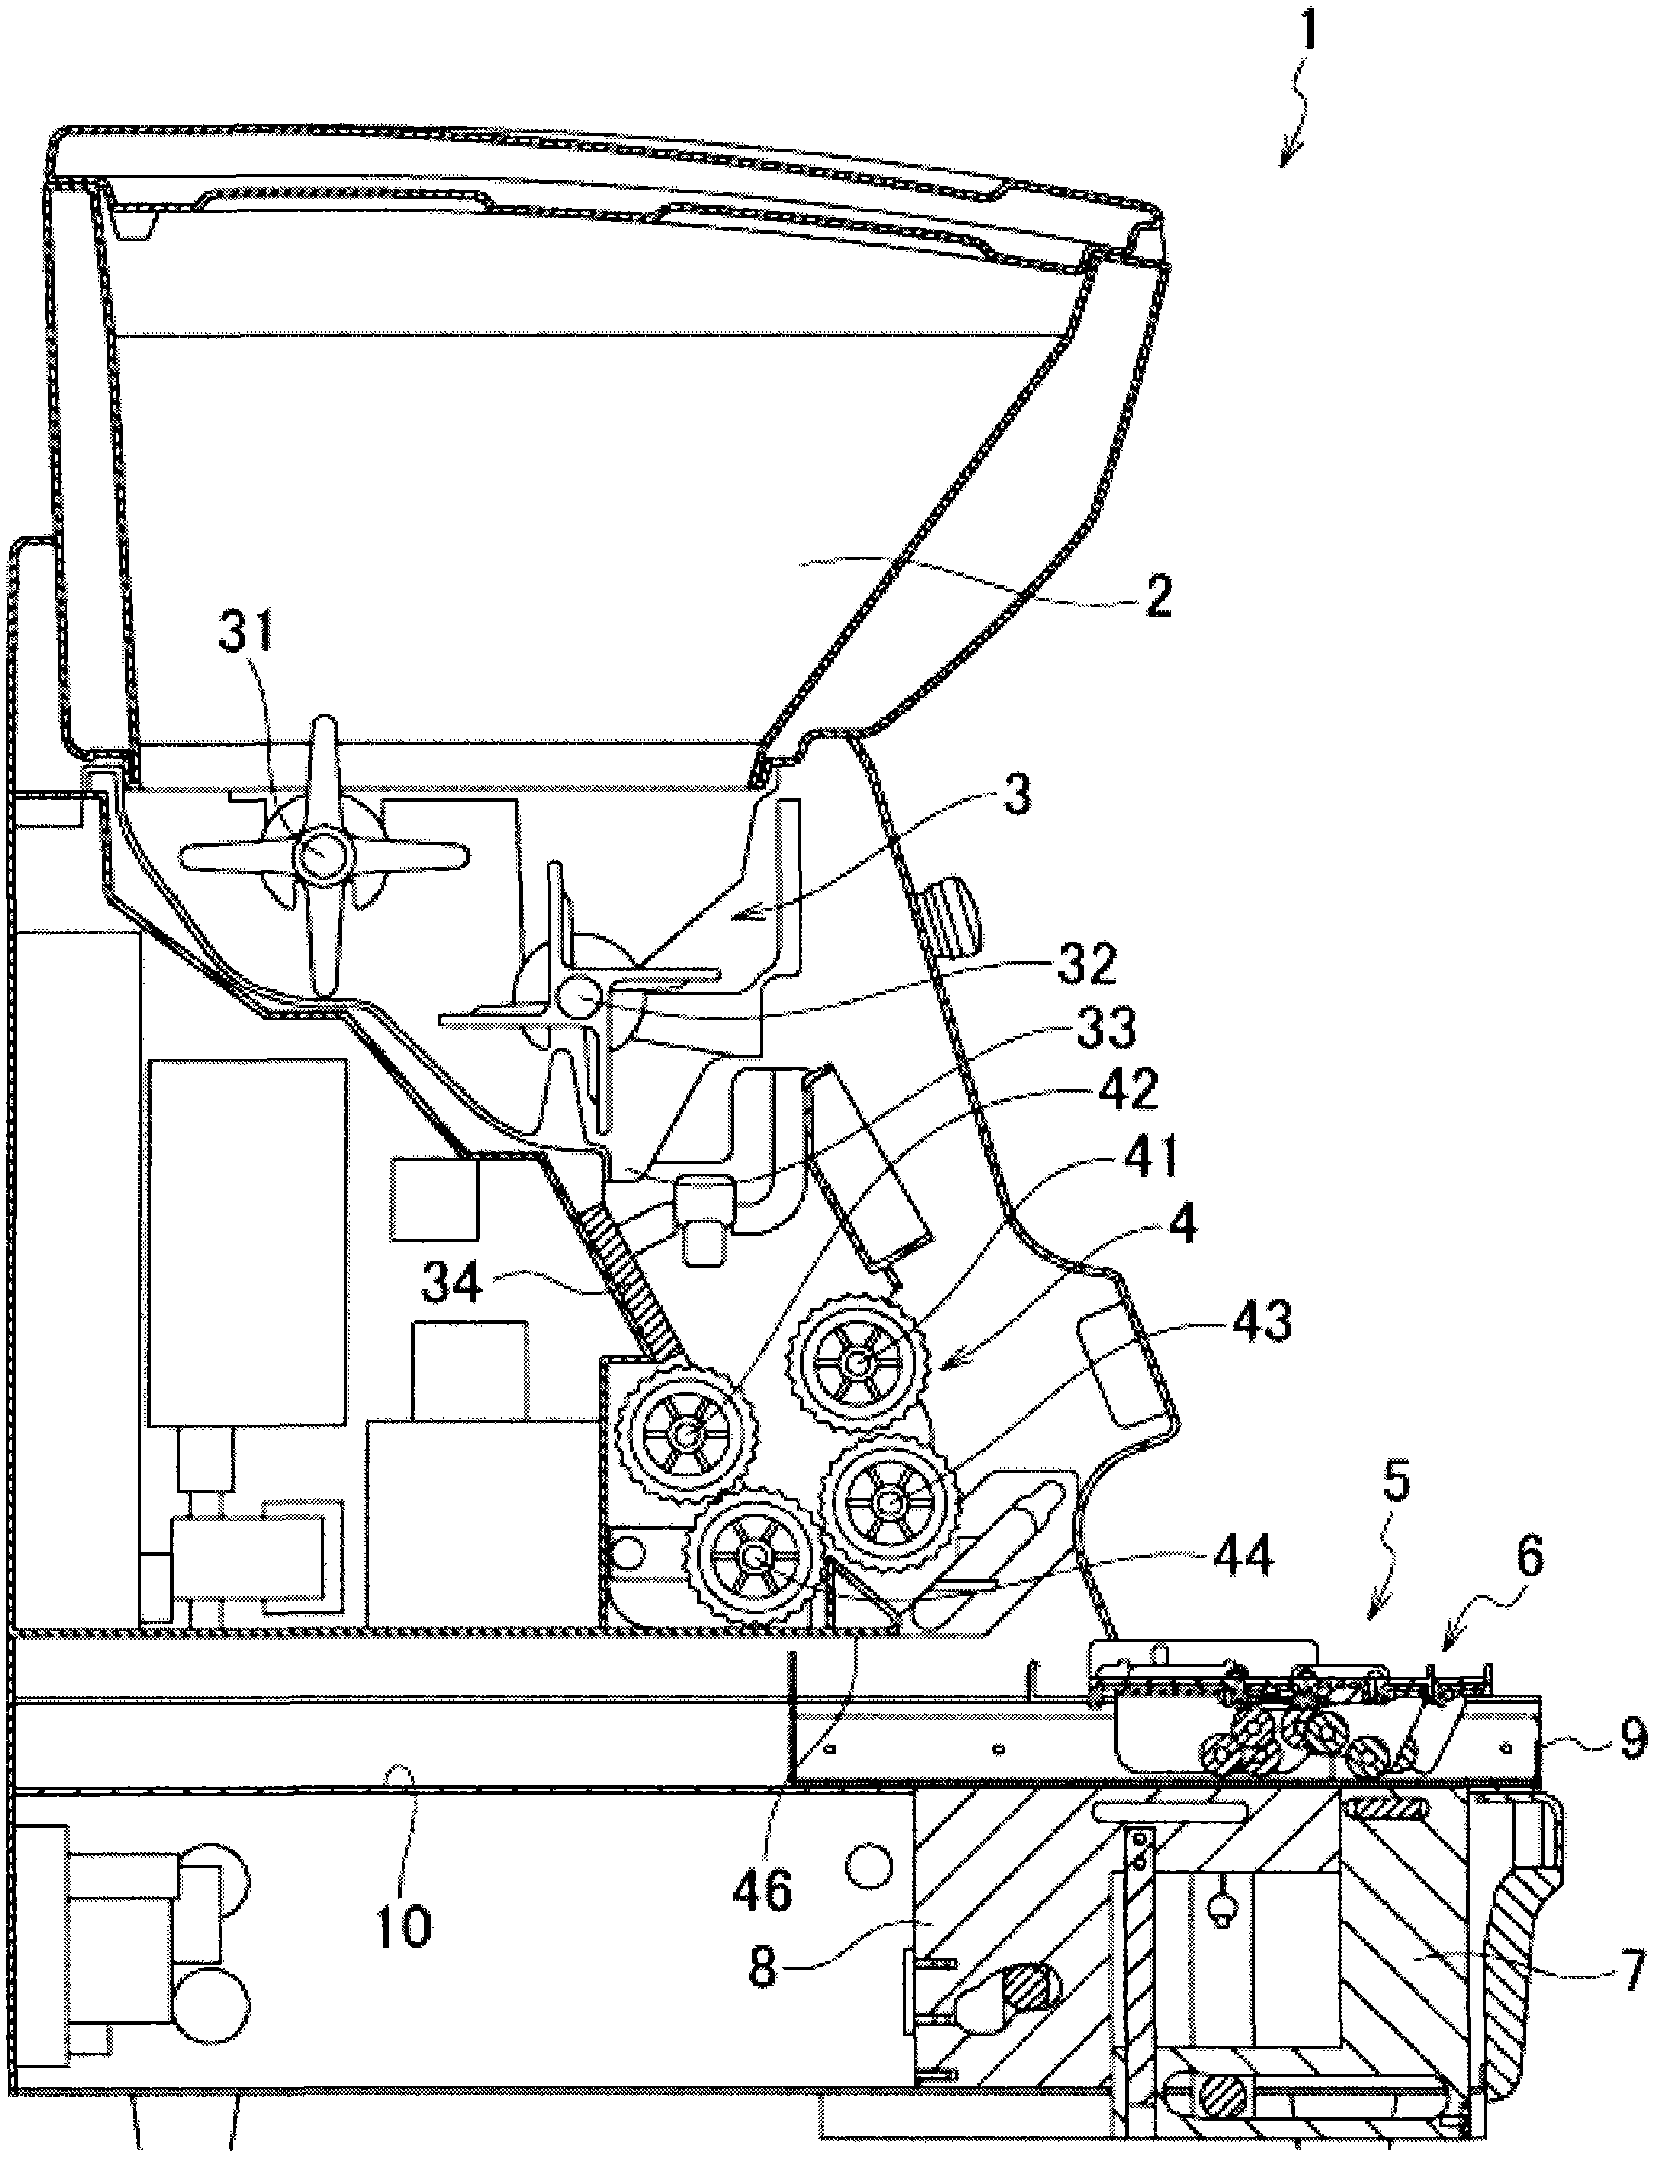 Food forming device